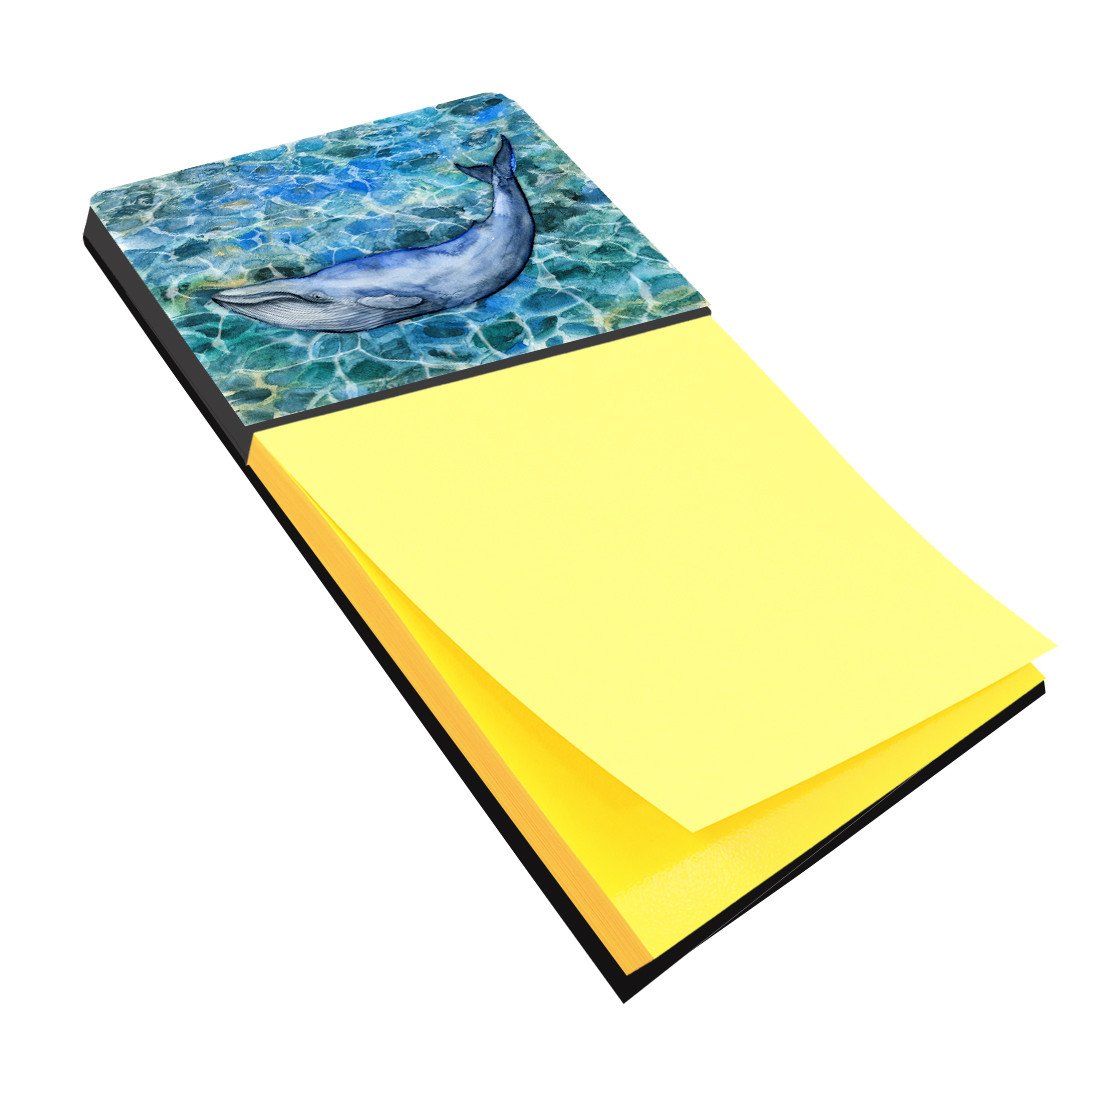 Humpback Whale Sticky Note Holder BB5340SN by Caroline's Treasures